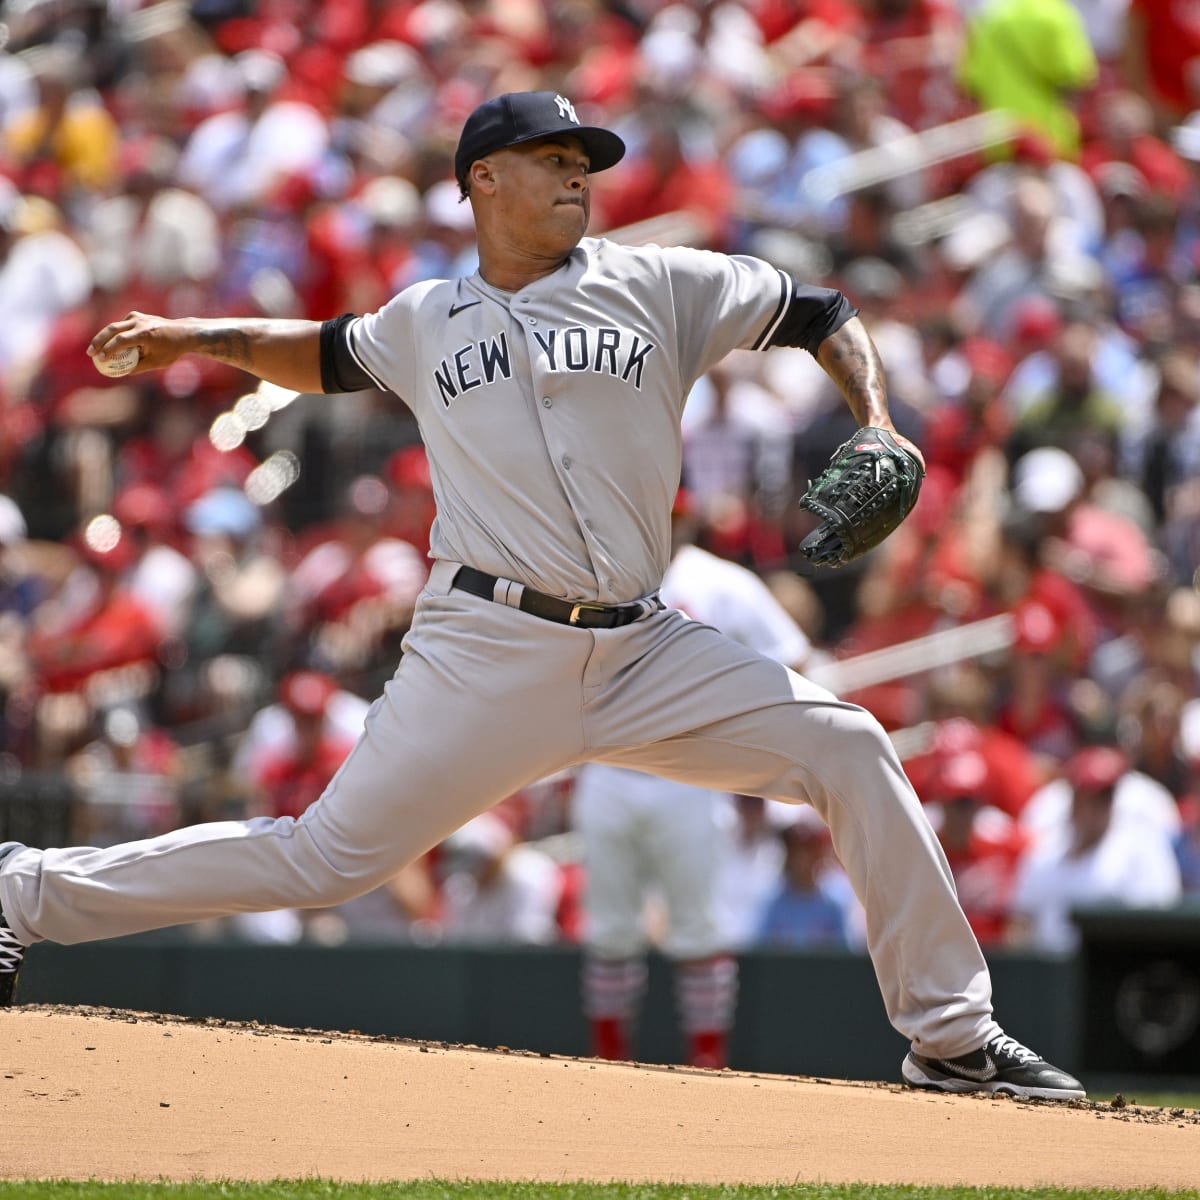 Yankees' new ace Frankie Montas still not with club, but debut